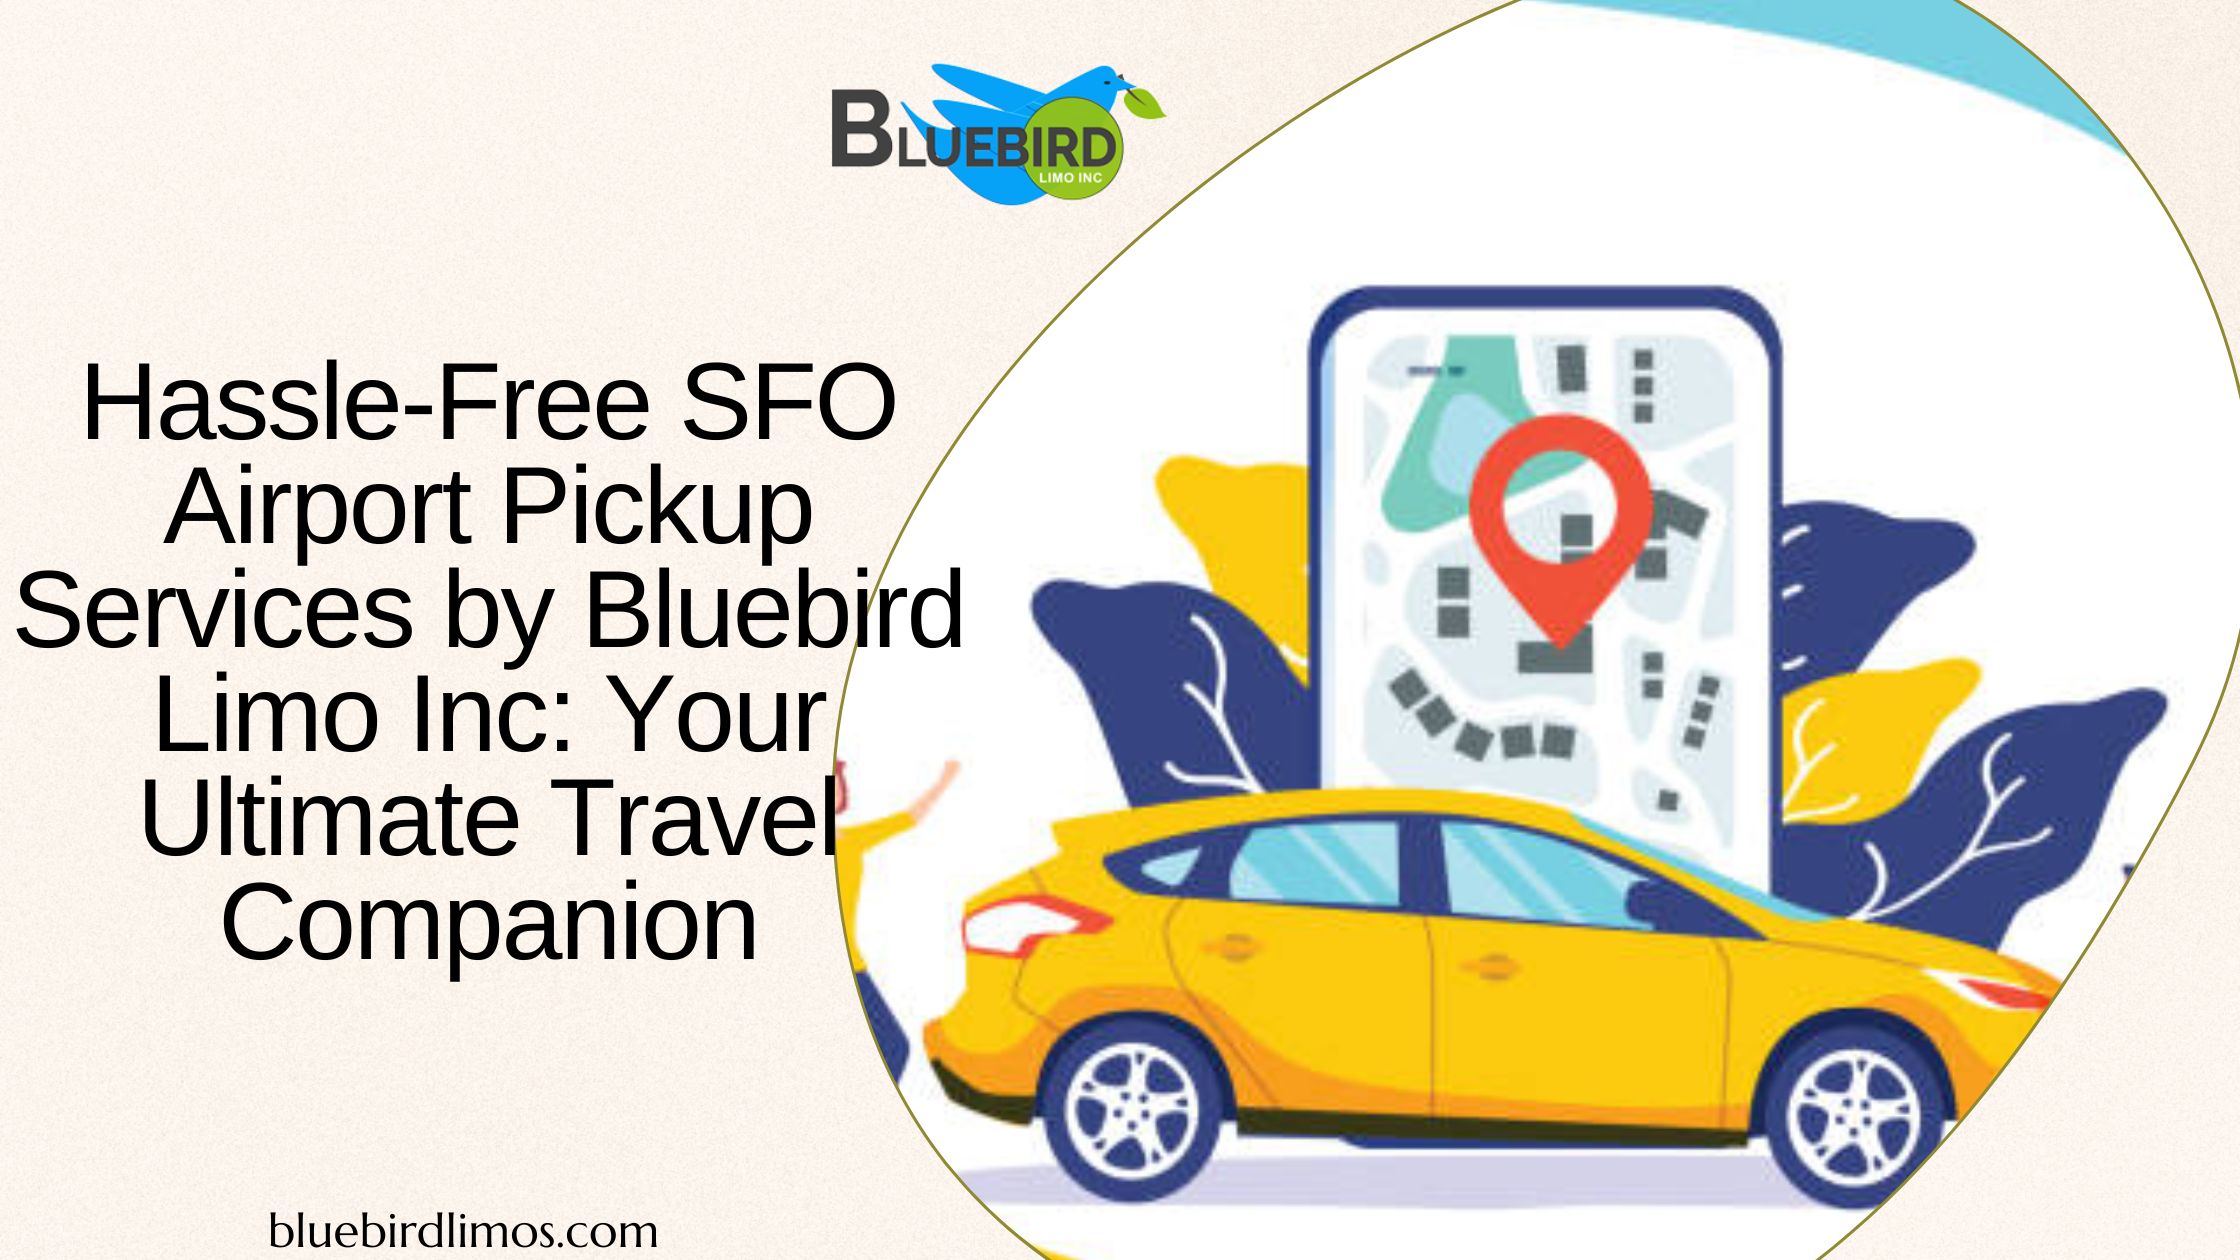 Hassle-Free SFO Airport Pickup Services by Bluebird Limo Inc Your Ultimate Travel Companion.jpg